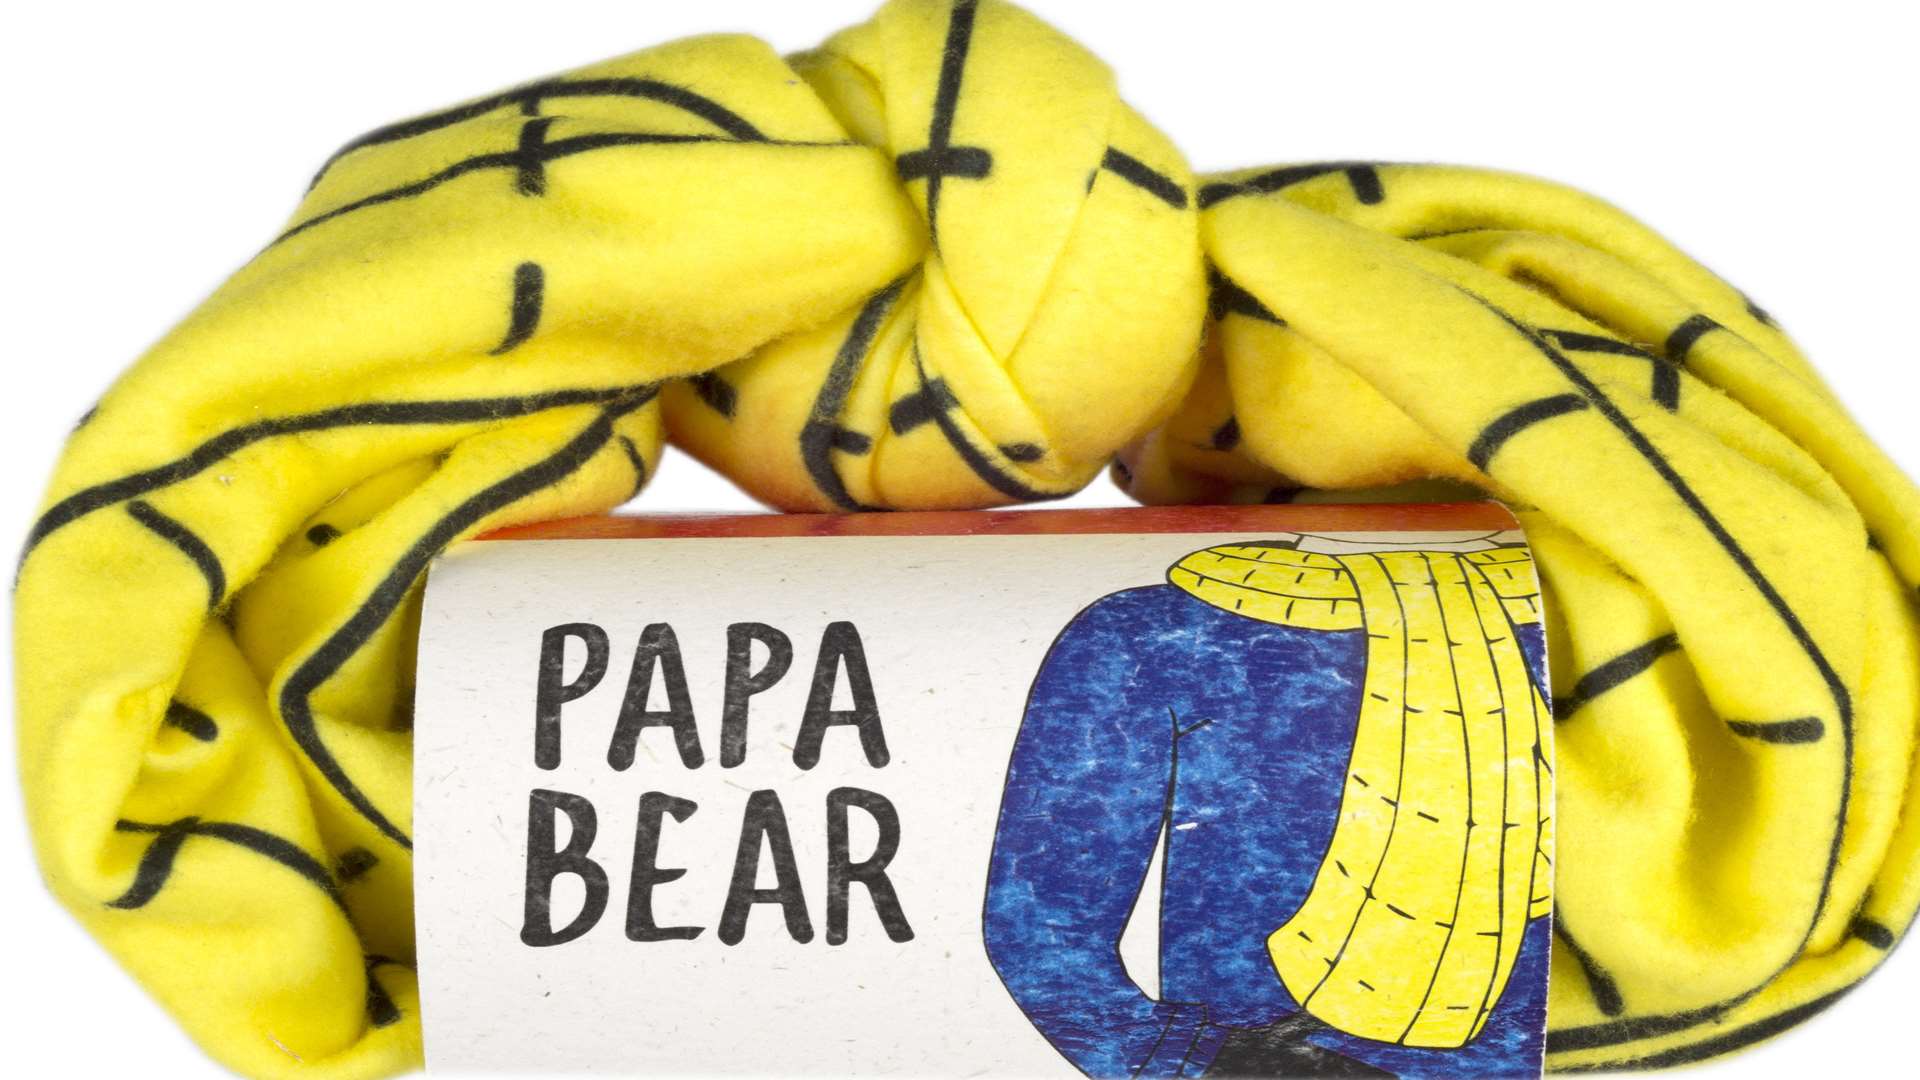 Lush's Papa Bear includes a 'Thanks Dad' soap, so he'll remember how much you appreciate him every time he washes his face, and comes wrapped in a yellow scarf inspired by a famous fictional bear. It's £33.95 at Lush